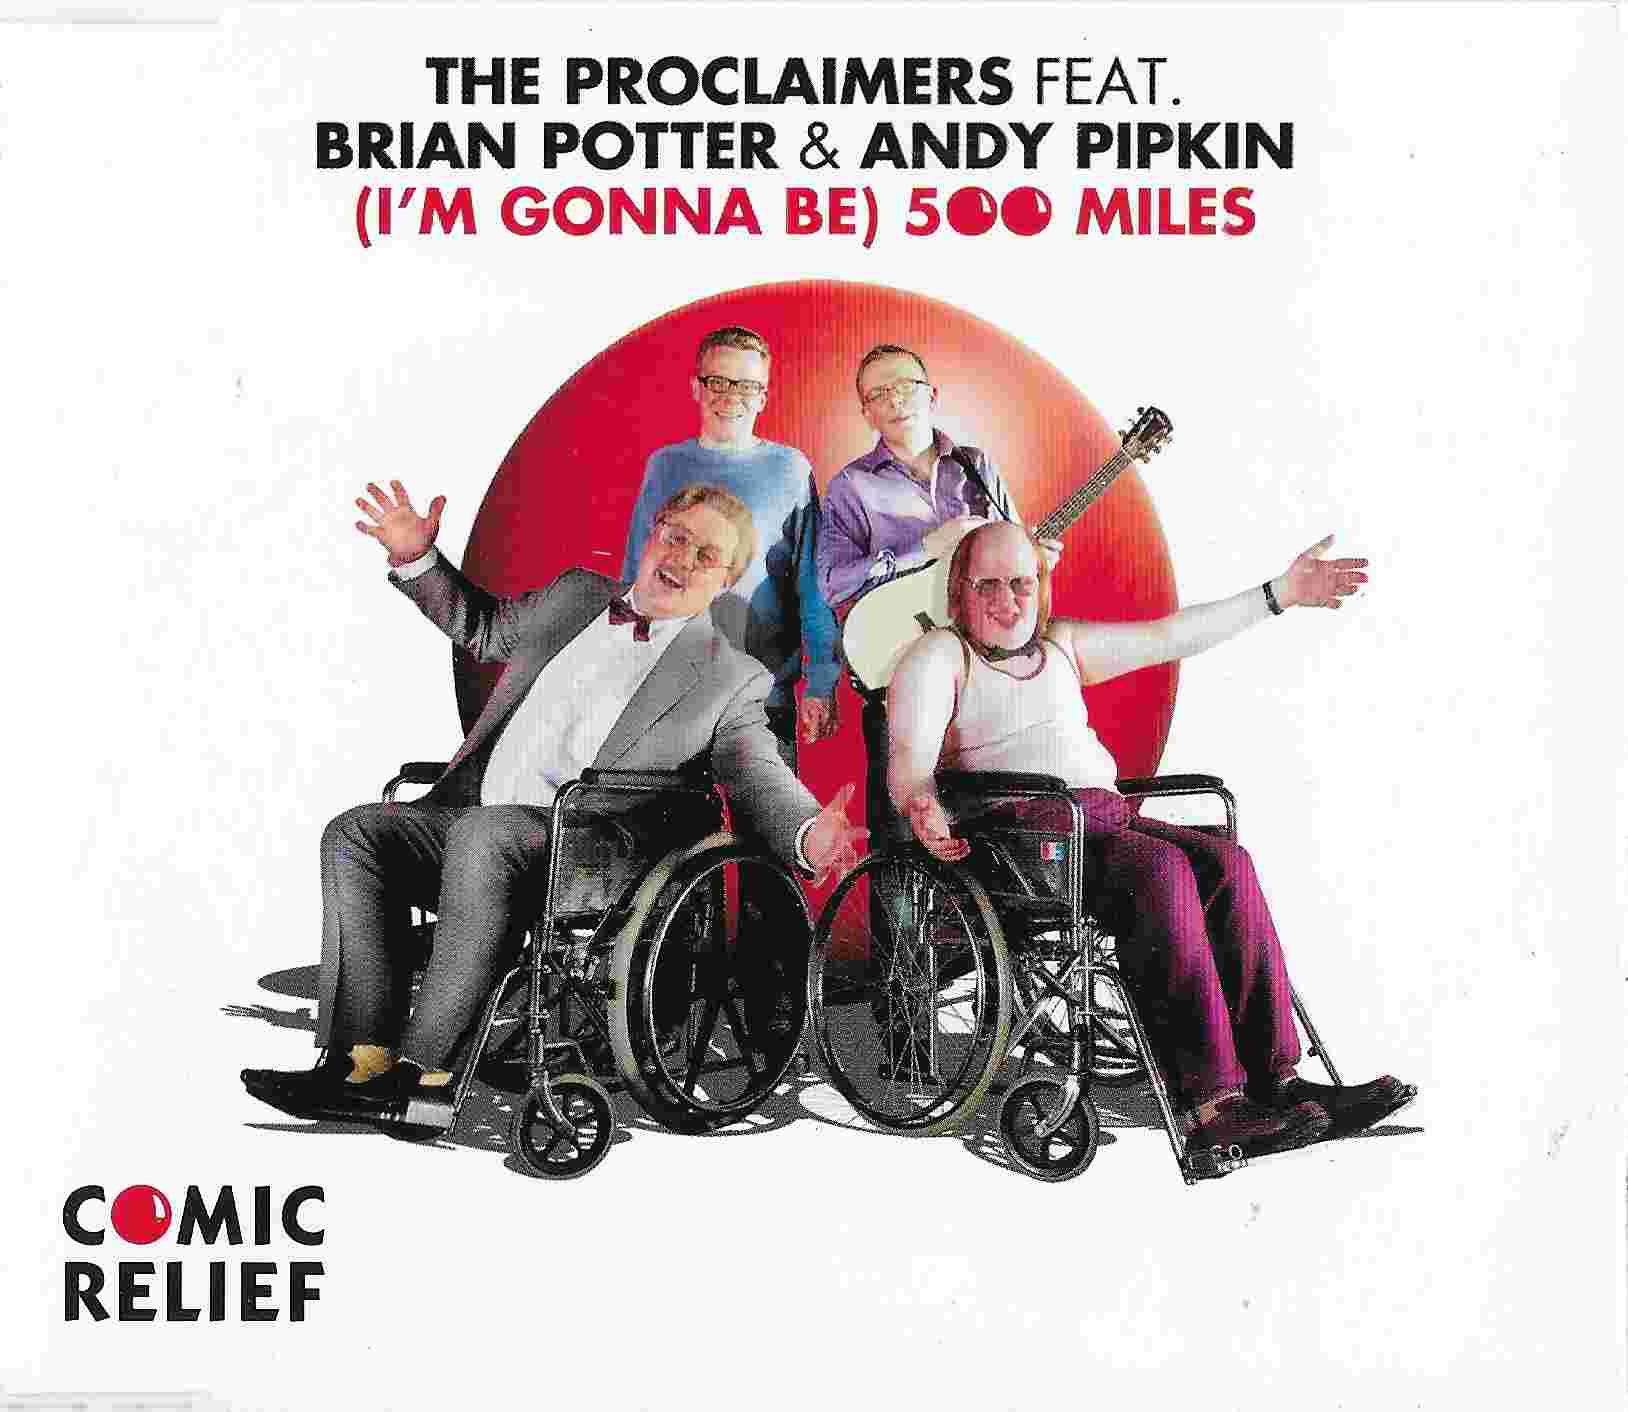 Picture of COMICCD 01 (I'm gonna be) 500 miles - Comic relief by artist The Proclaimers featuring Brian Potter and Andy Pipkin 